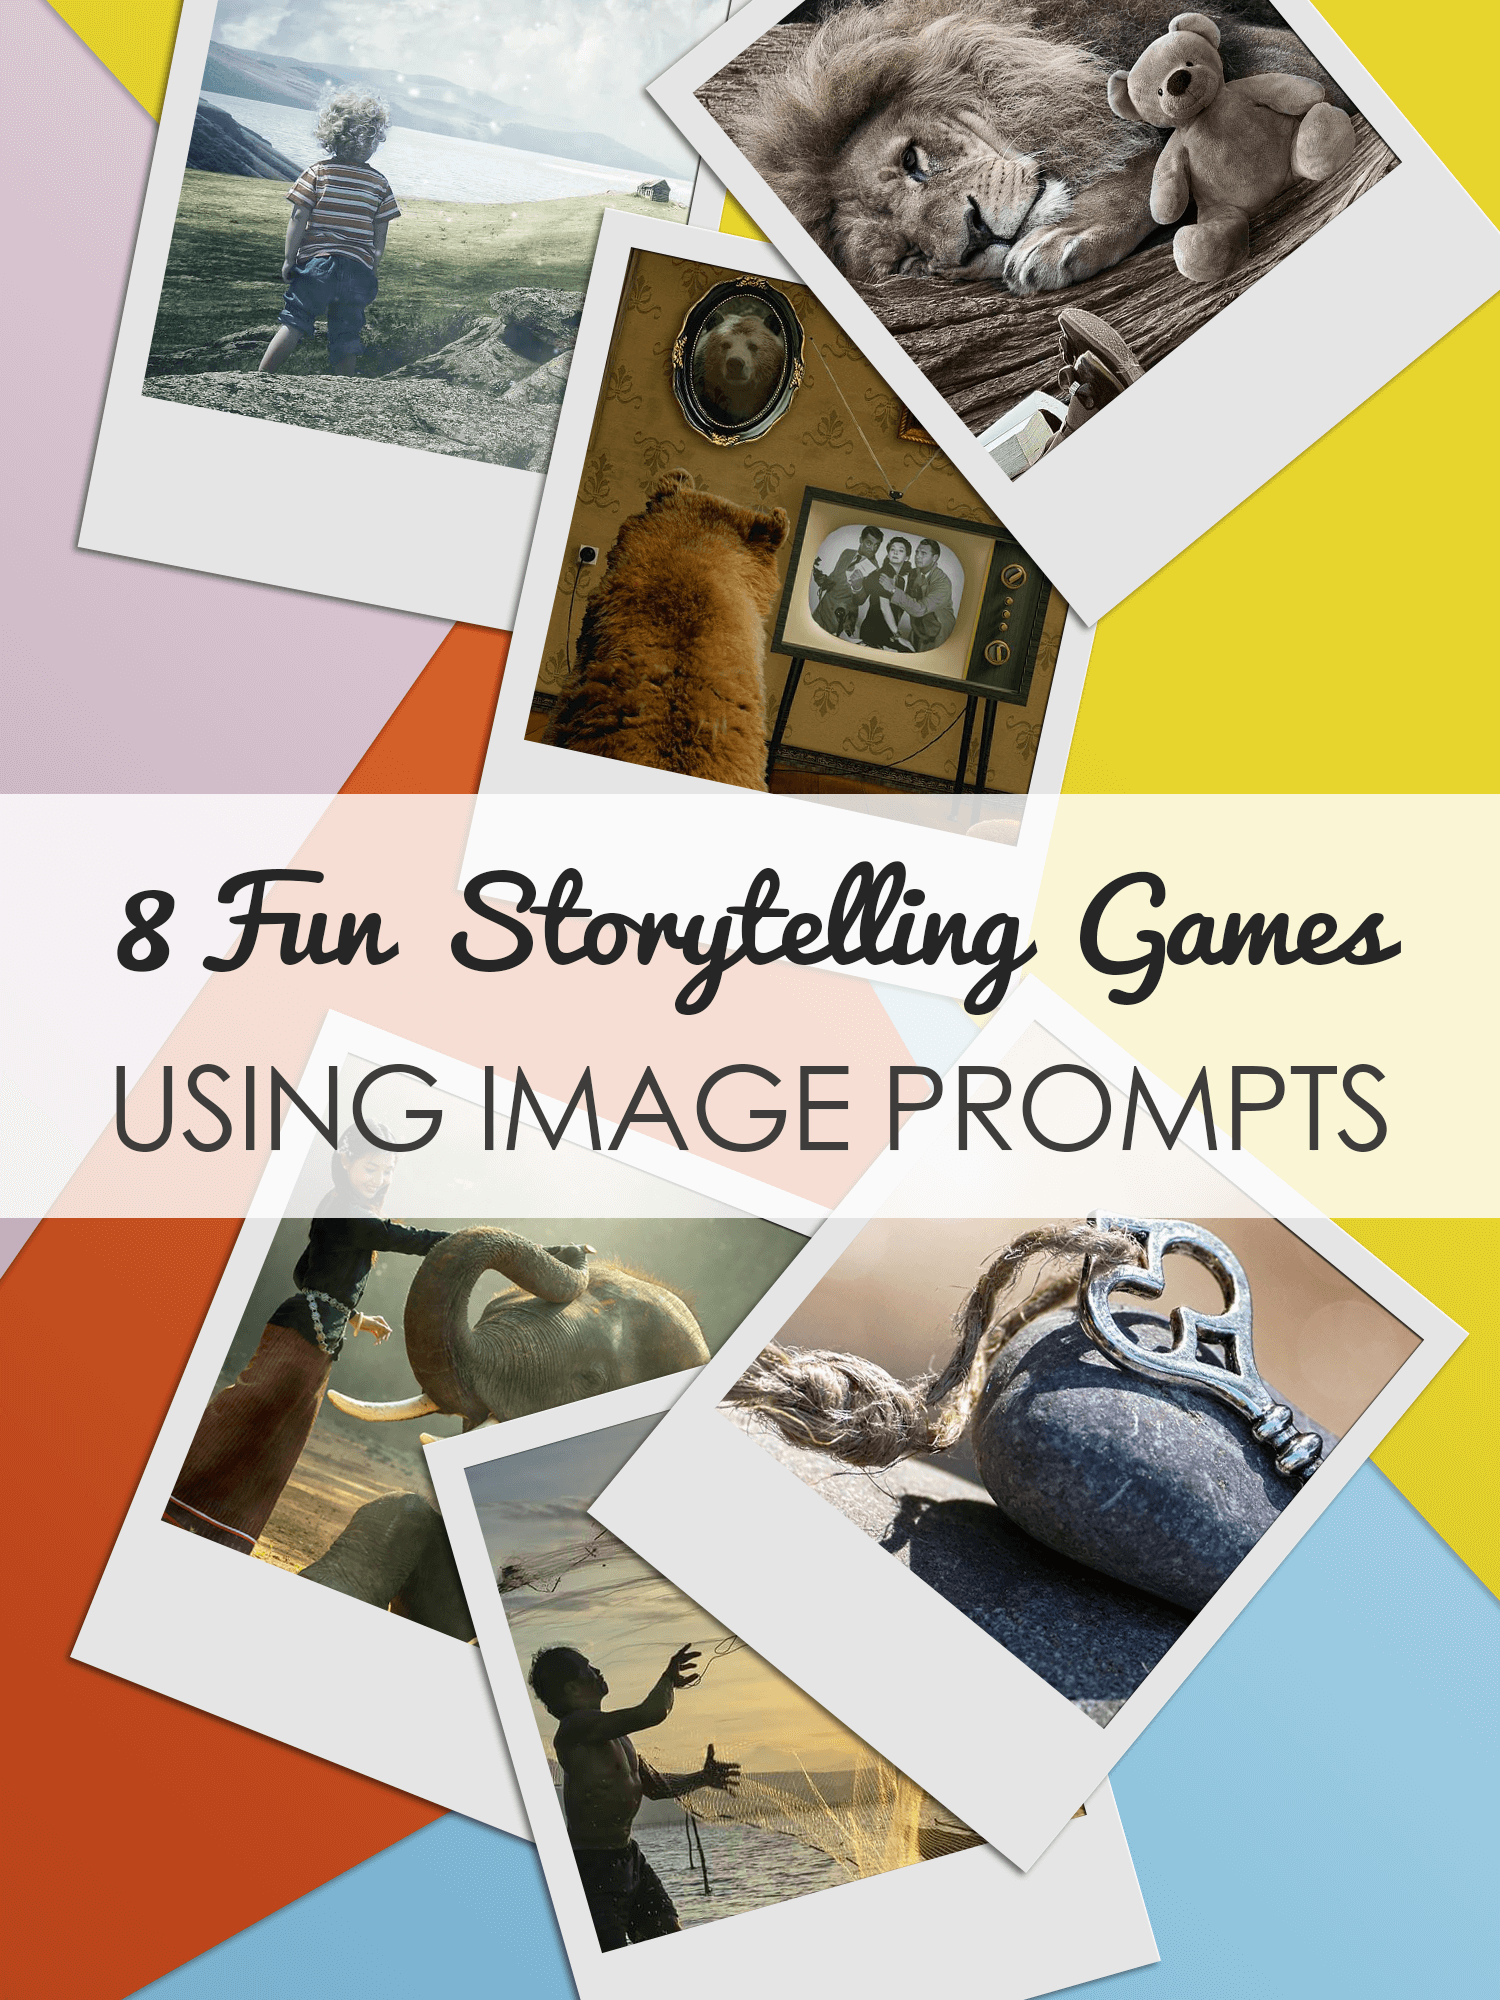 8 Fun Storytelling Games Using Image Prompts_imagine forest